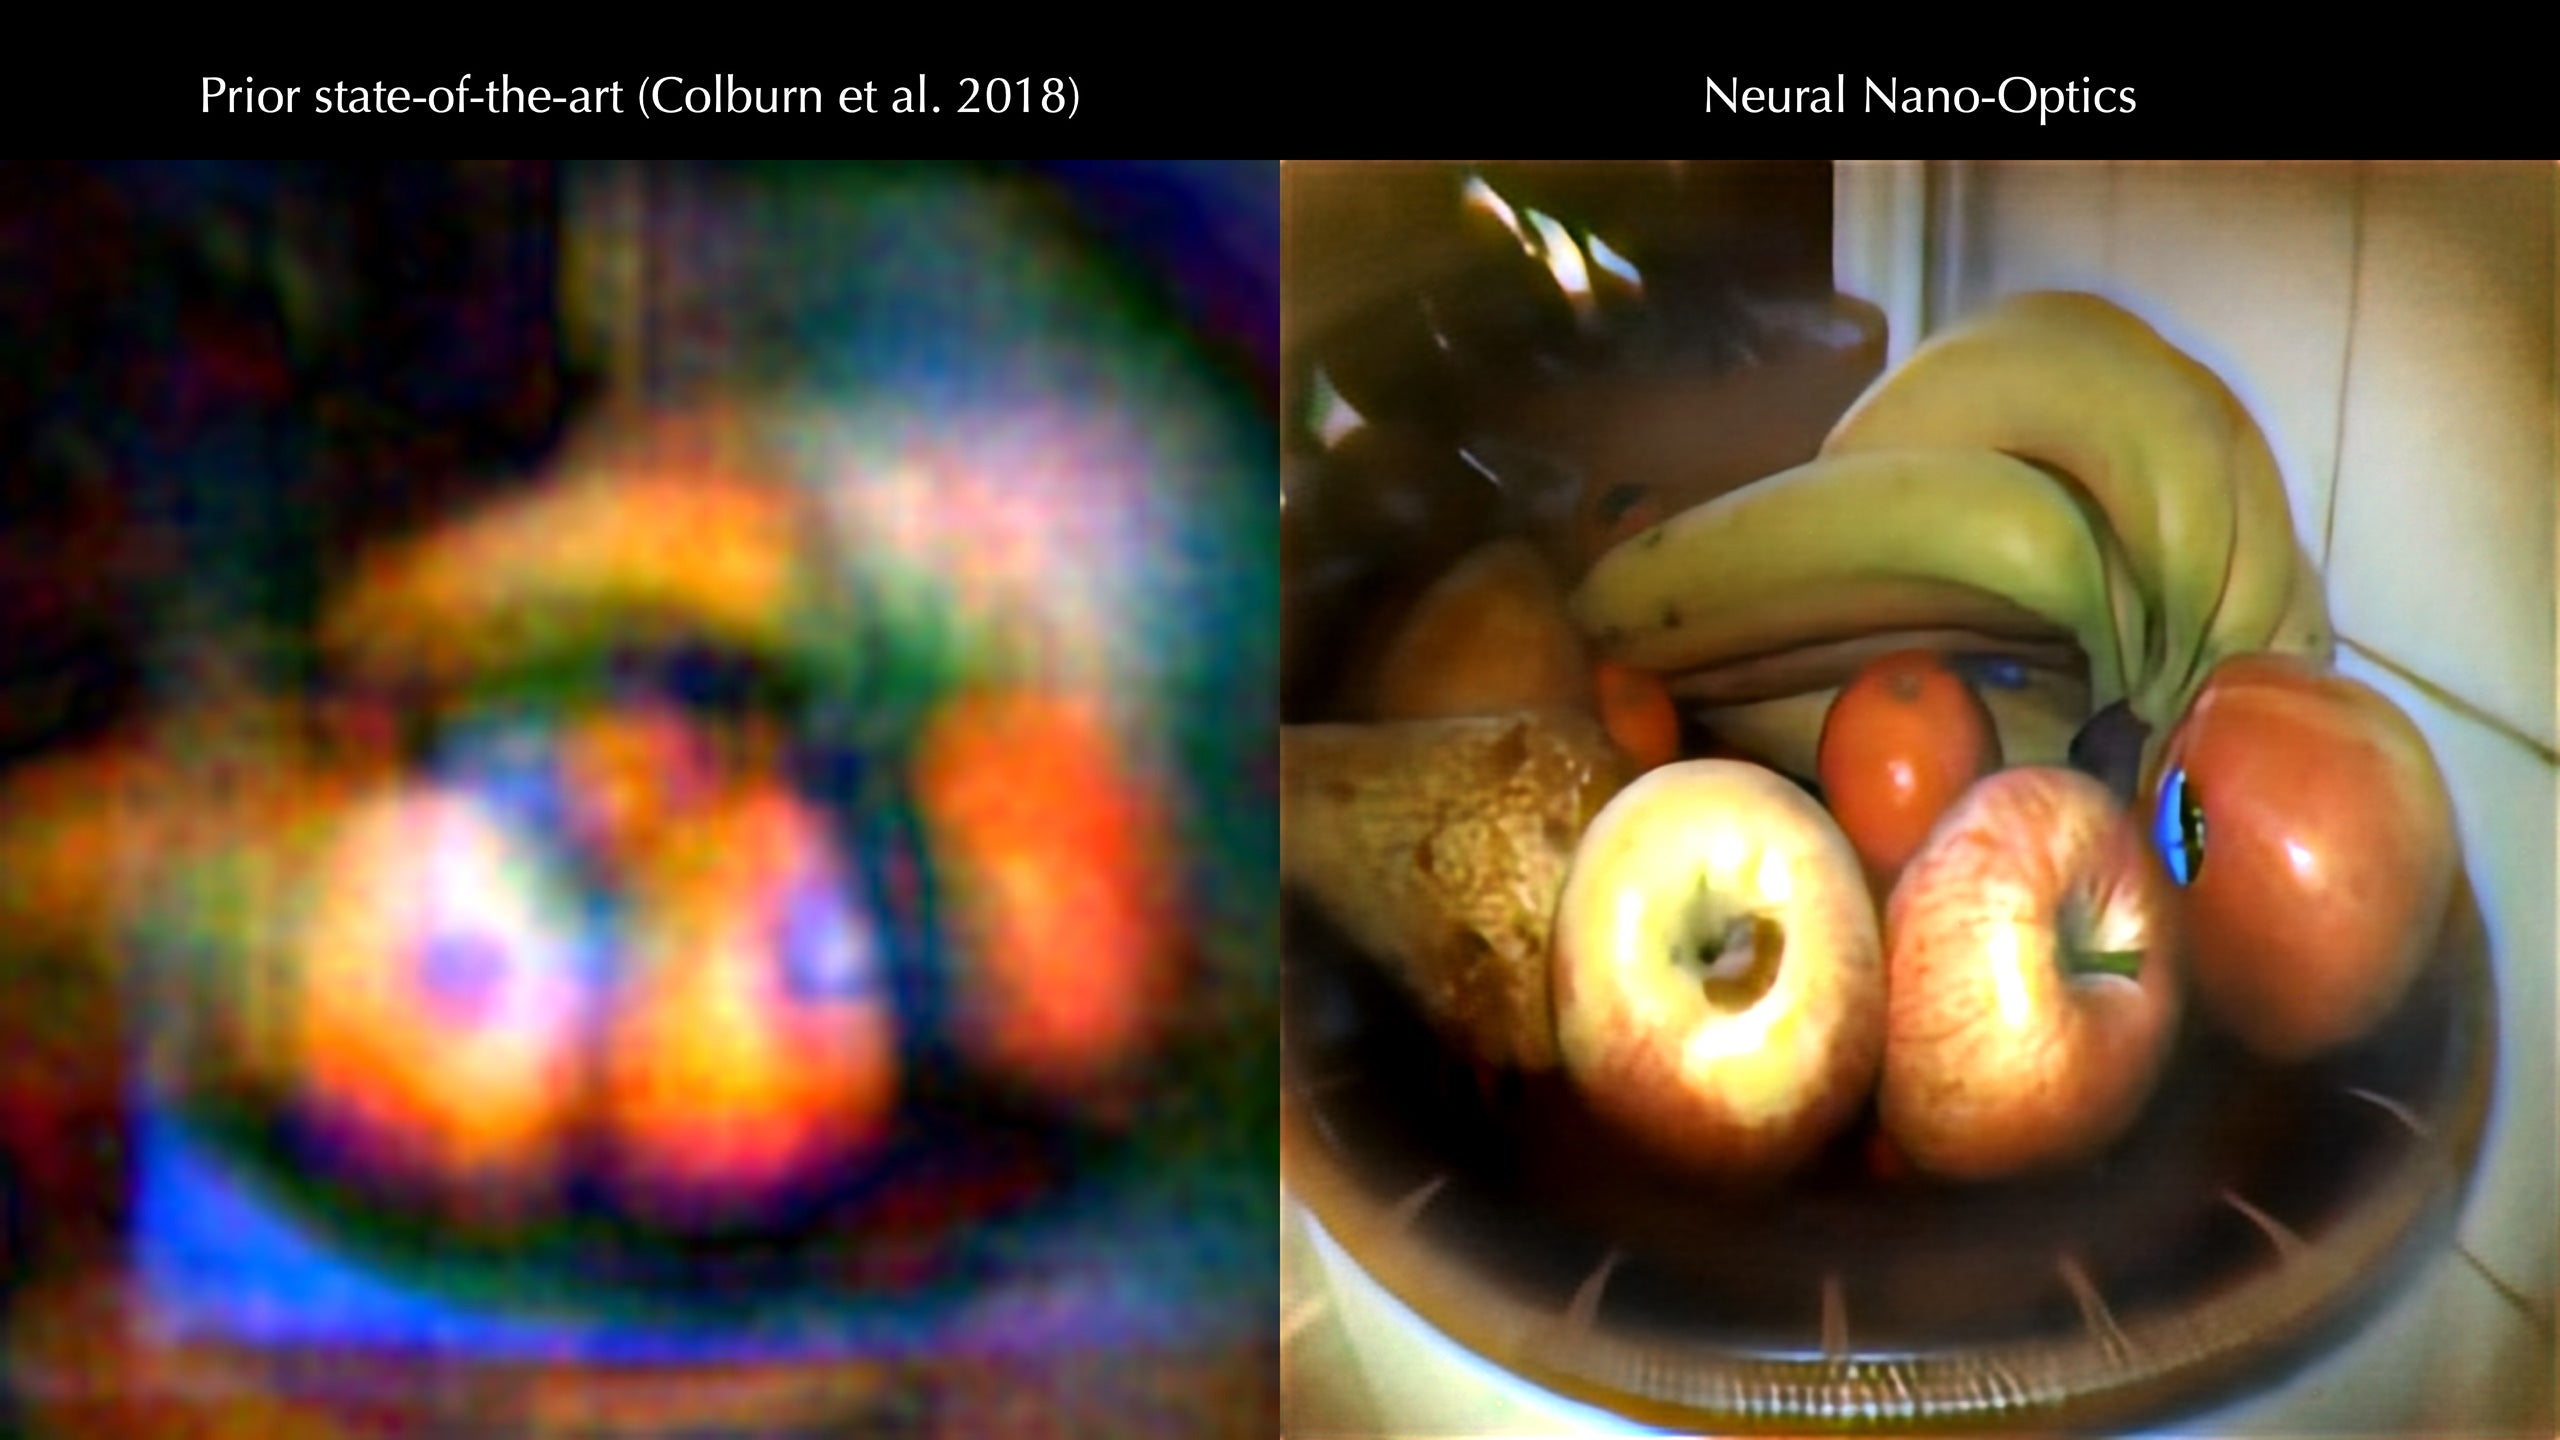 A comparison showing the latest generation of neural nano-optics